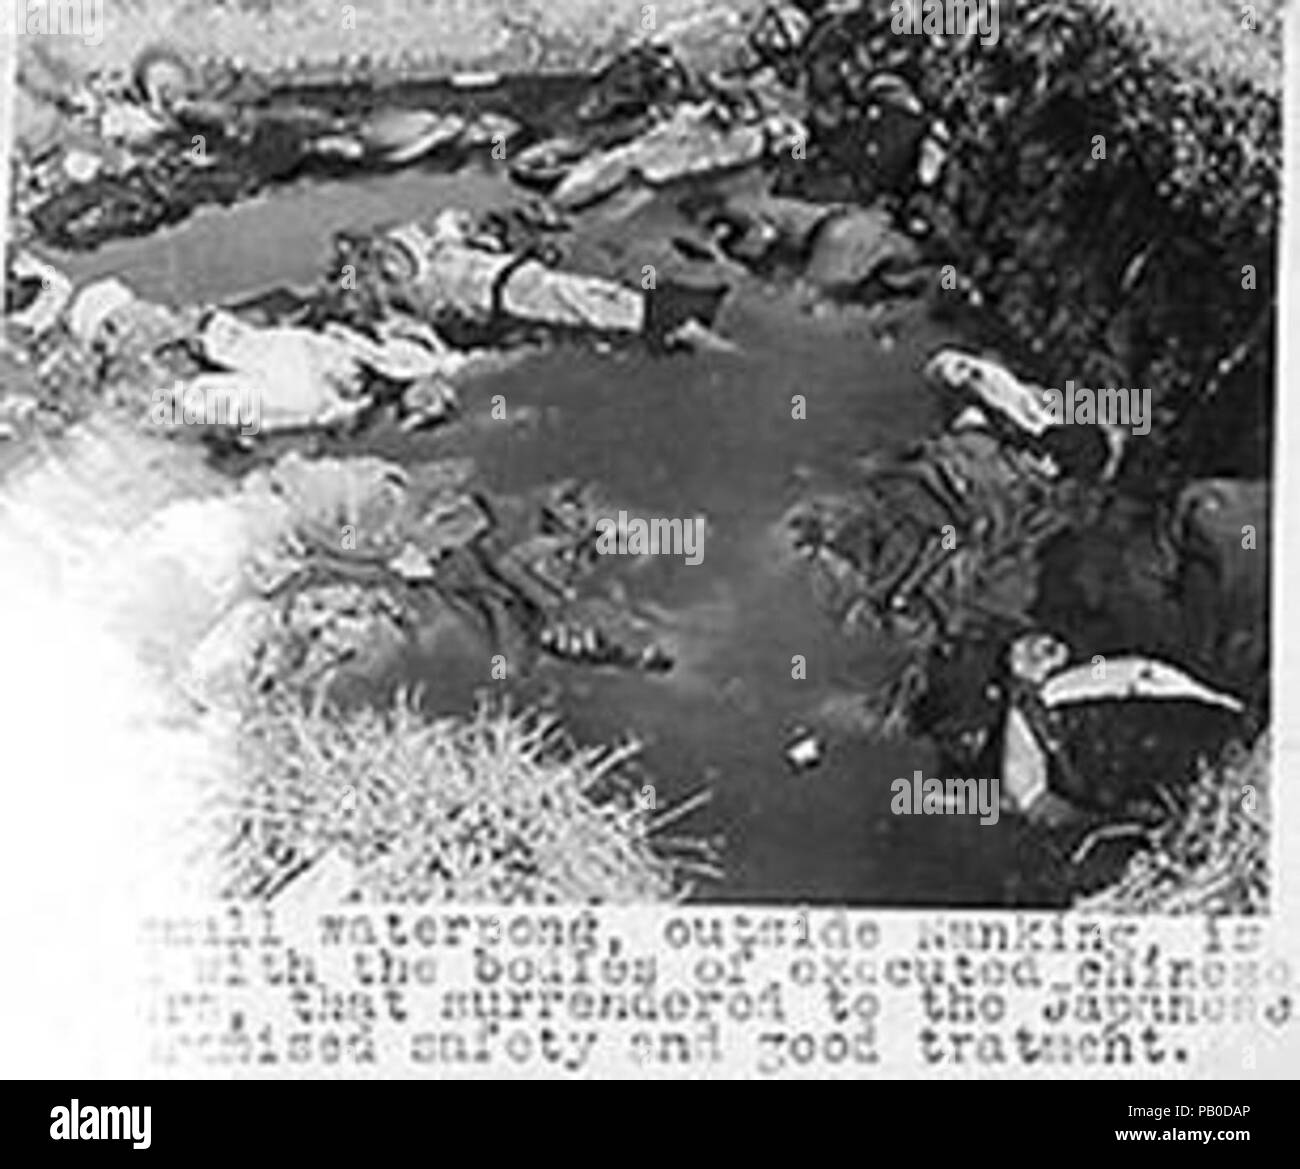 A waterpond filled with the bodies of executed Chinese soldiers who got safety promise by Japanese (a) Nanjing Massacre. Stock Photo